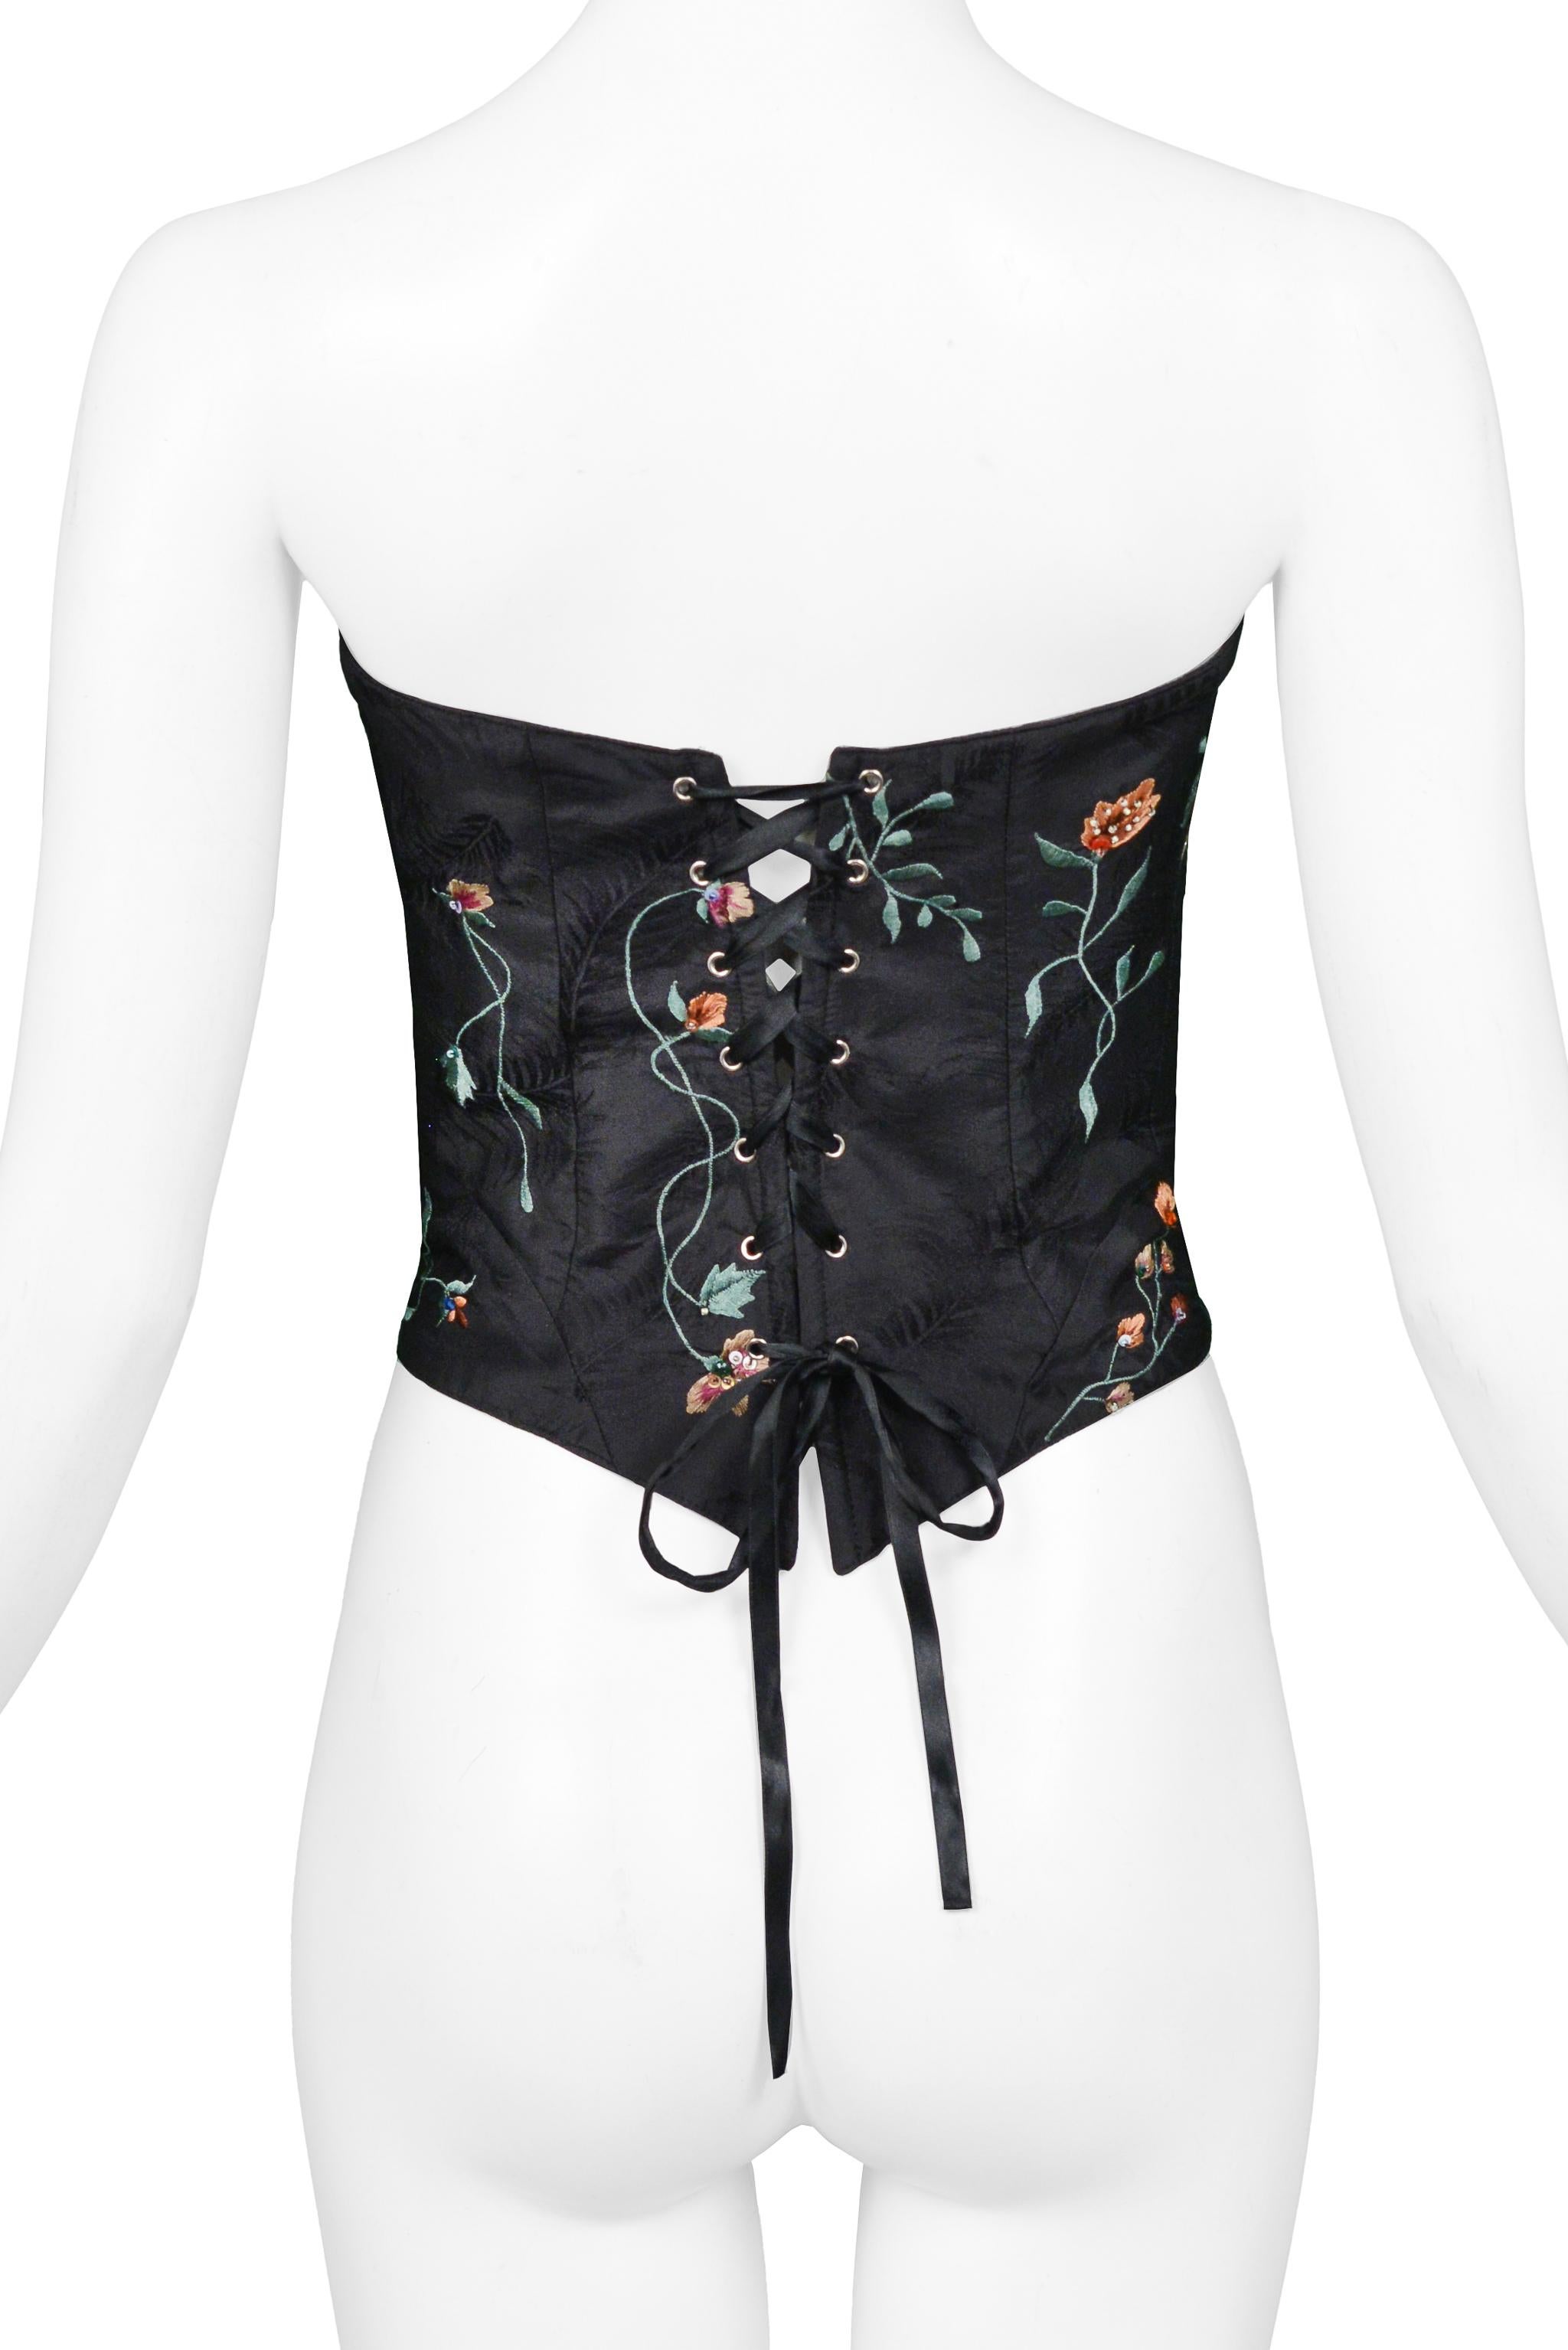 Lolita Lempicka Floral Embroidered Bustier 2000 In Excellent Condition For Sale In Los Angeles, CA